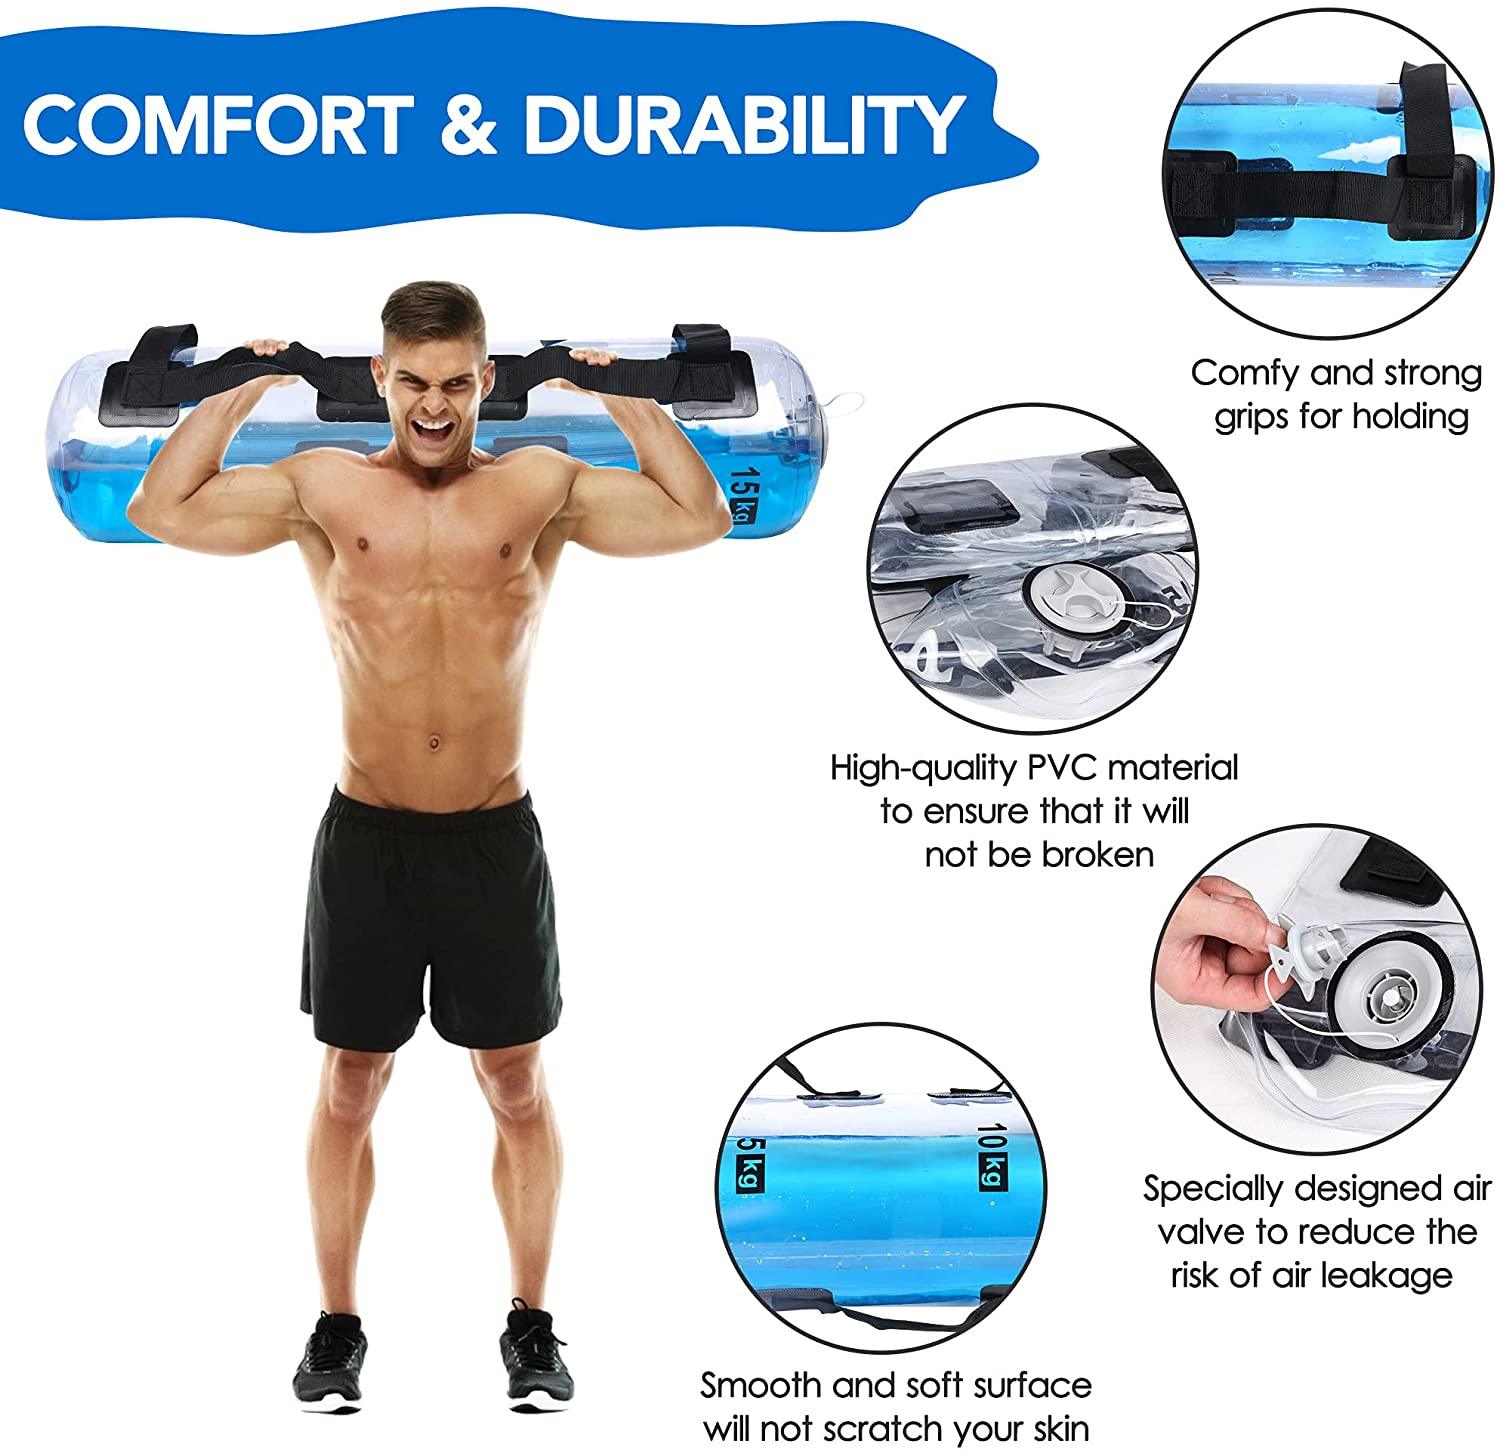 33LBS Water Power Bag Fitness Aqua Bags Weightlifting Body Building Sports Ultimate Core and Balance Workout - Portable Stability Fitness Equipment - Bosonshop